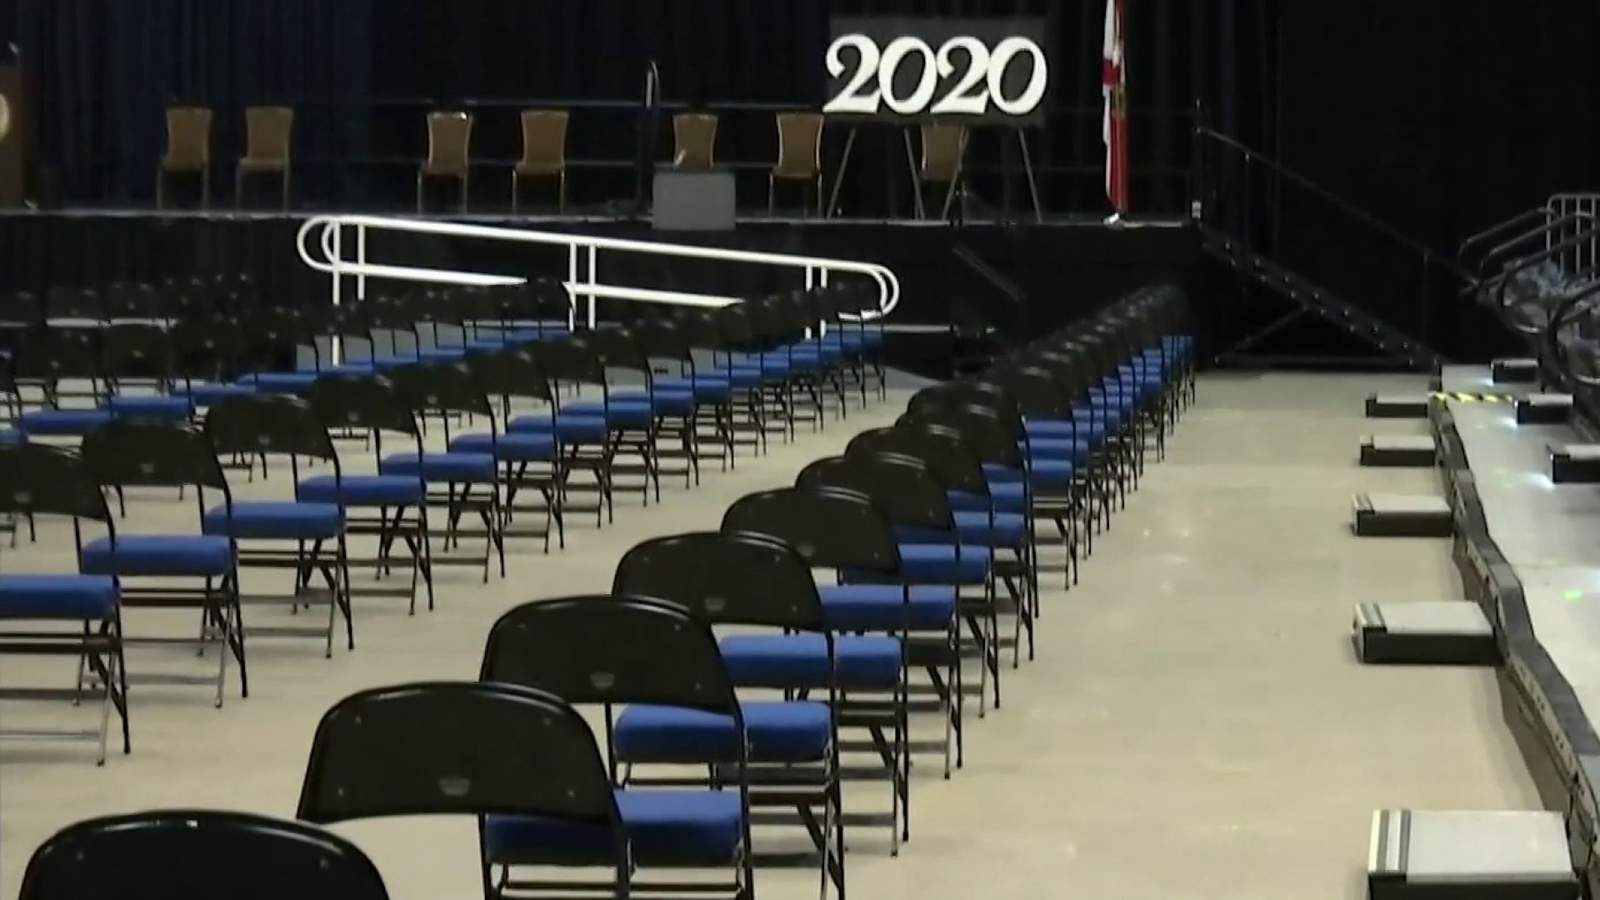 Volusia County students prepare for graduation during the COVID-19 pandemic